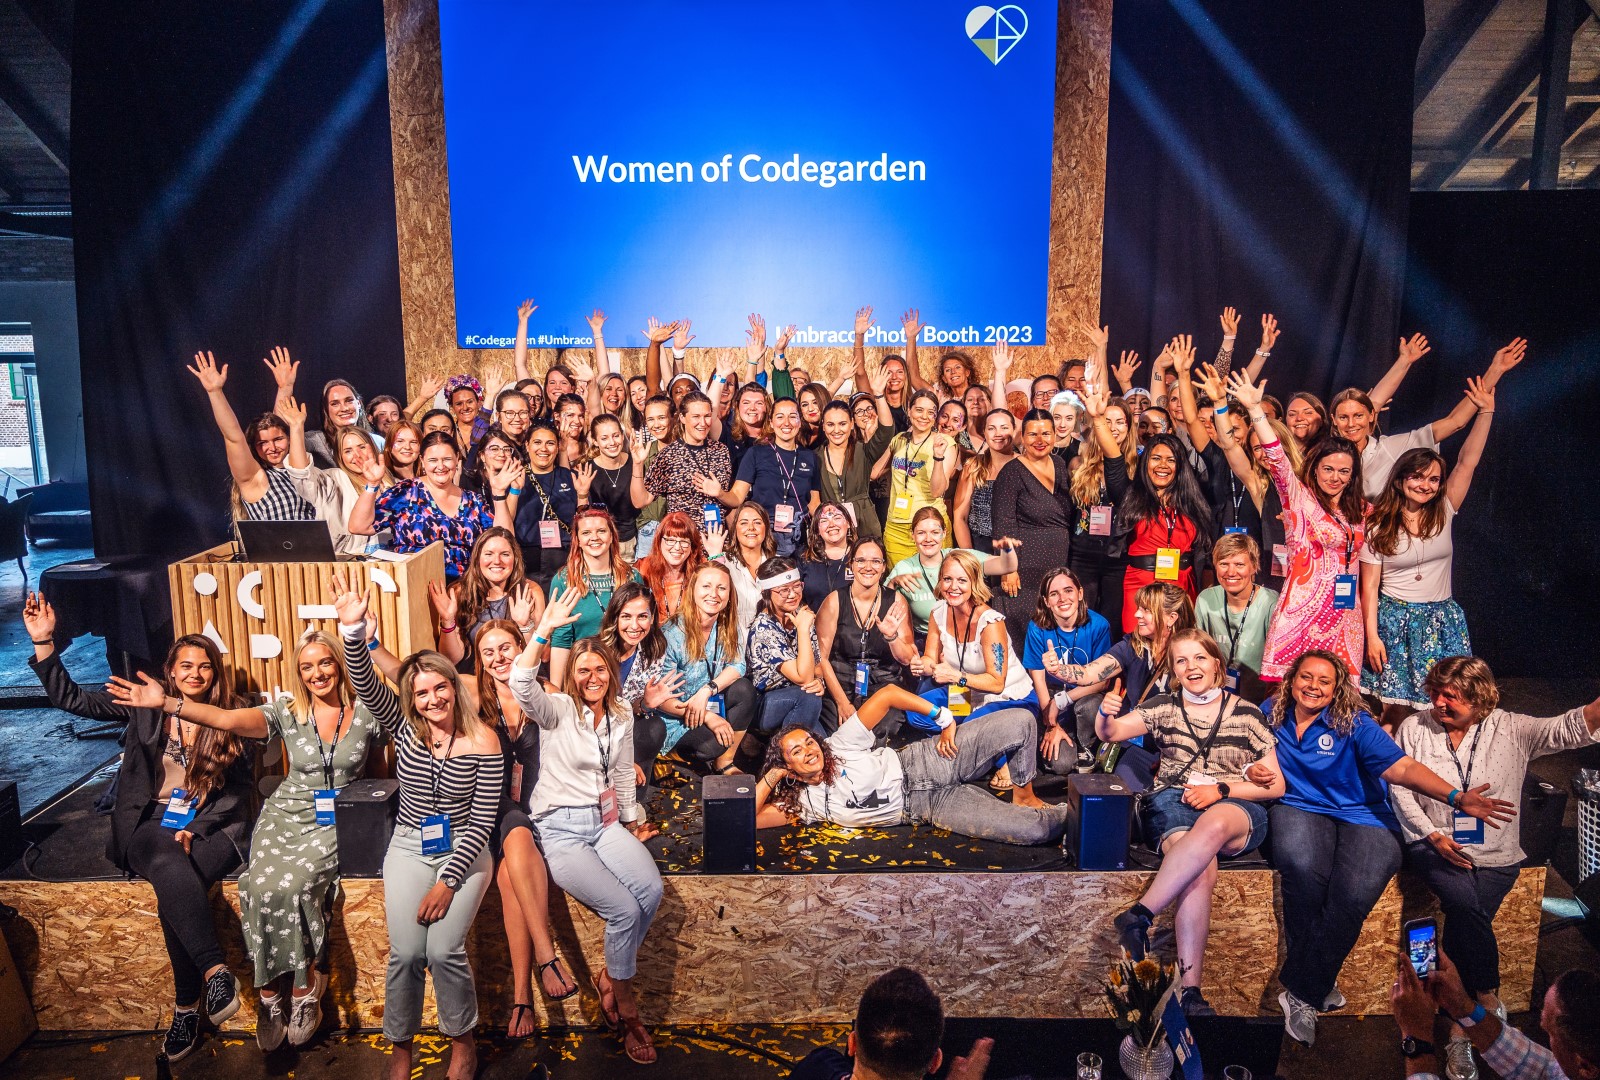 A photo of the umbraco codegarden main stage with all the women attendees smiling.